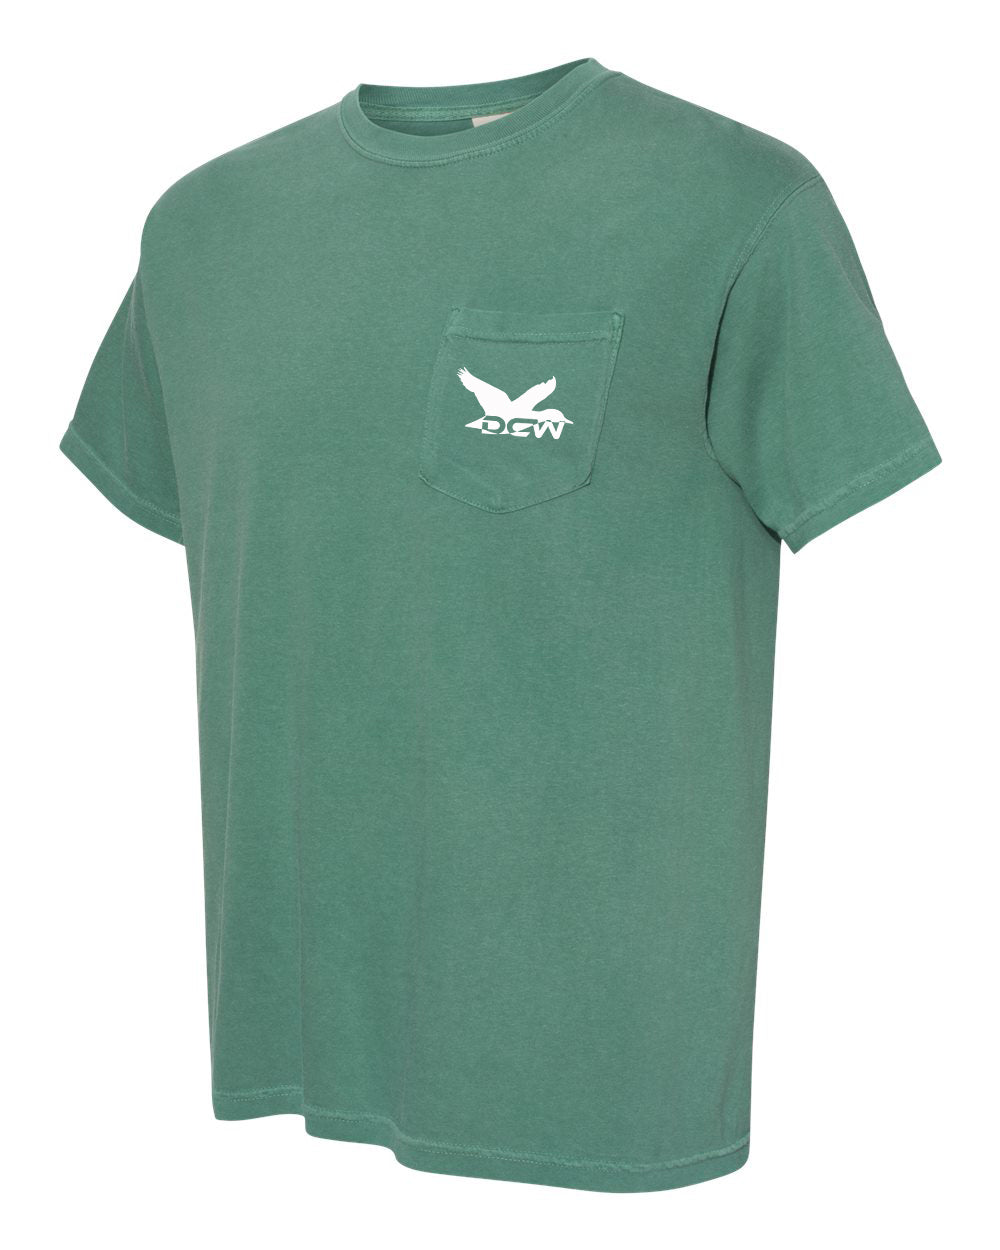 Doubled Up - Comfort Colors Pocket Tee